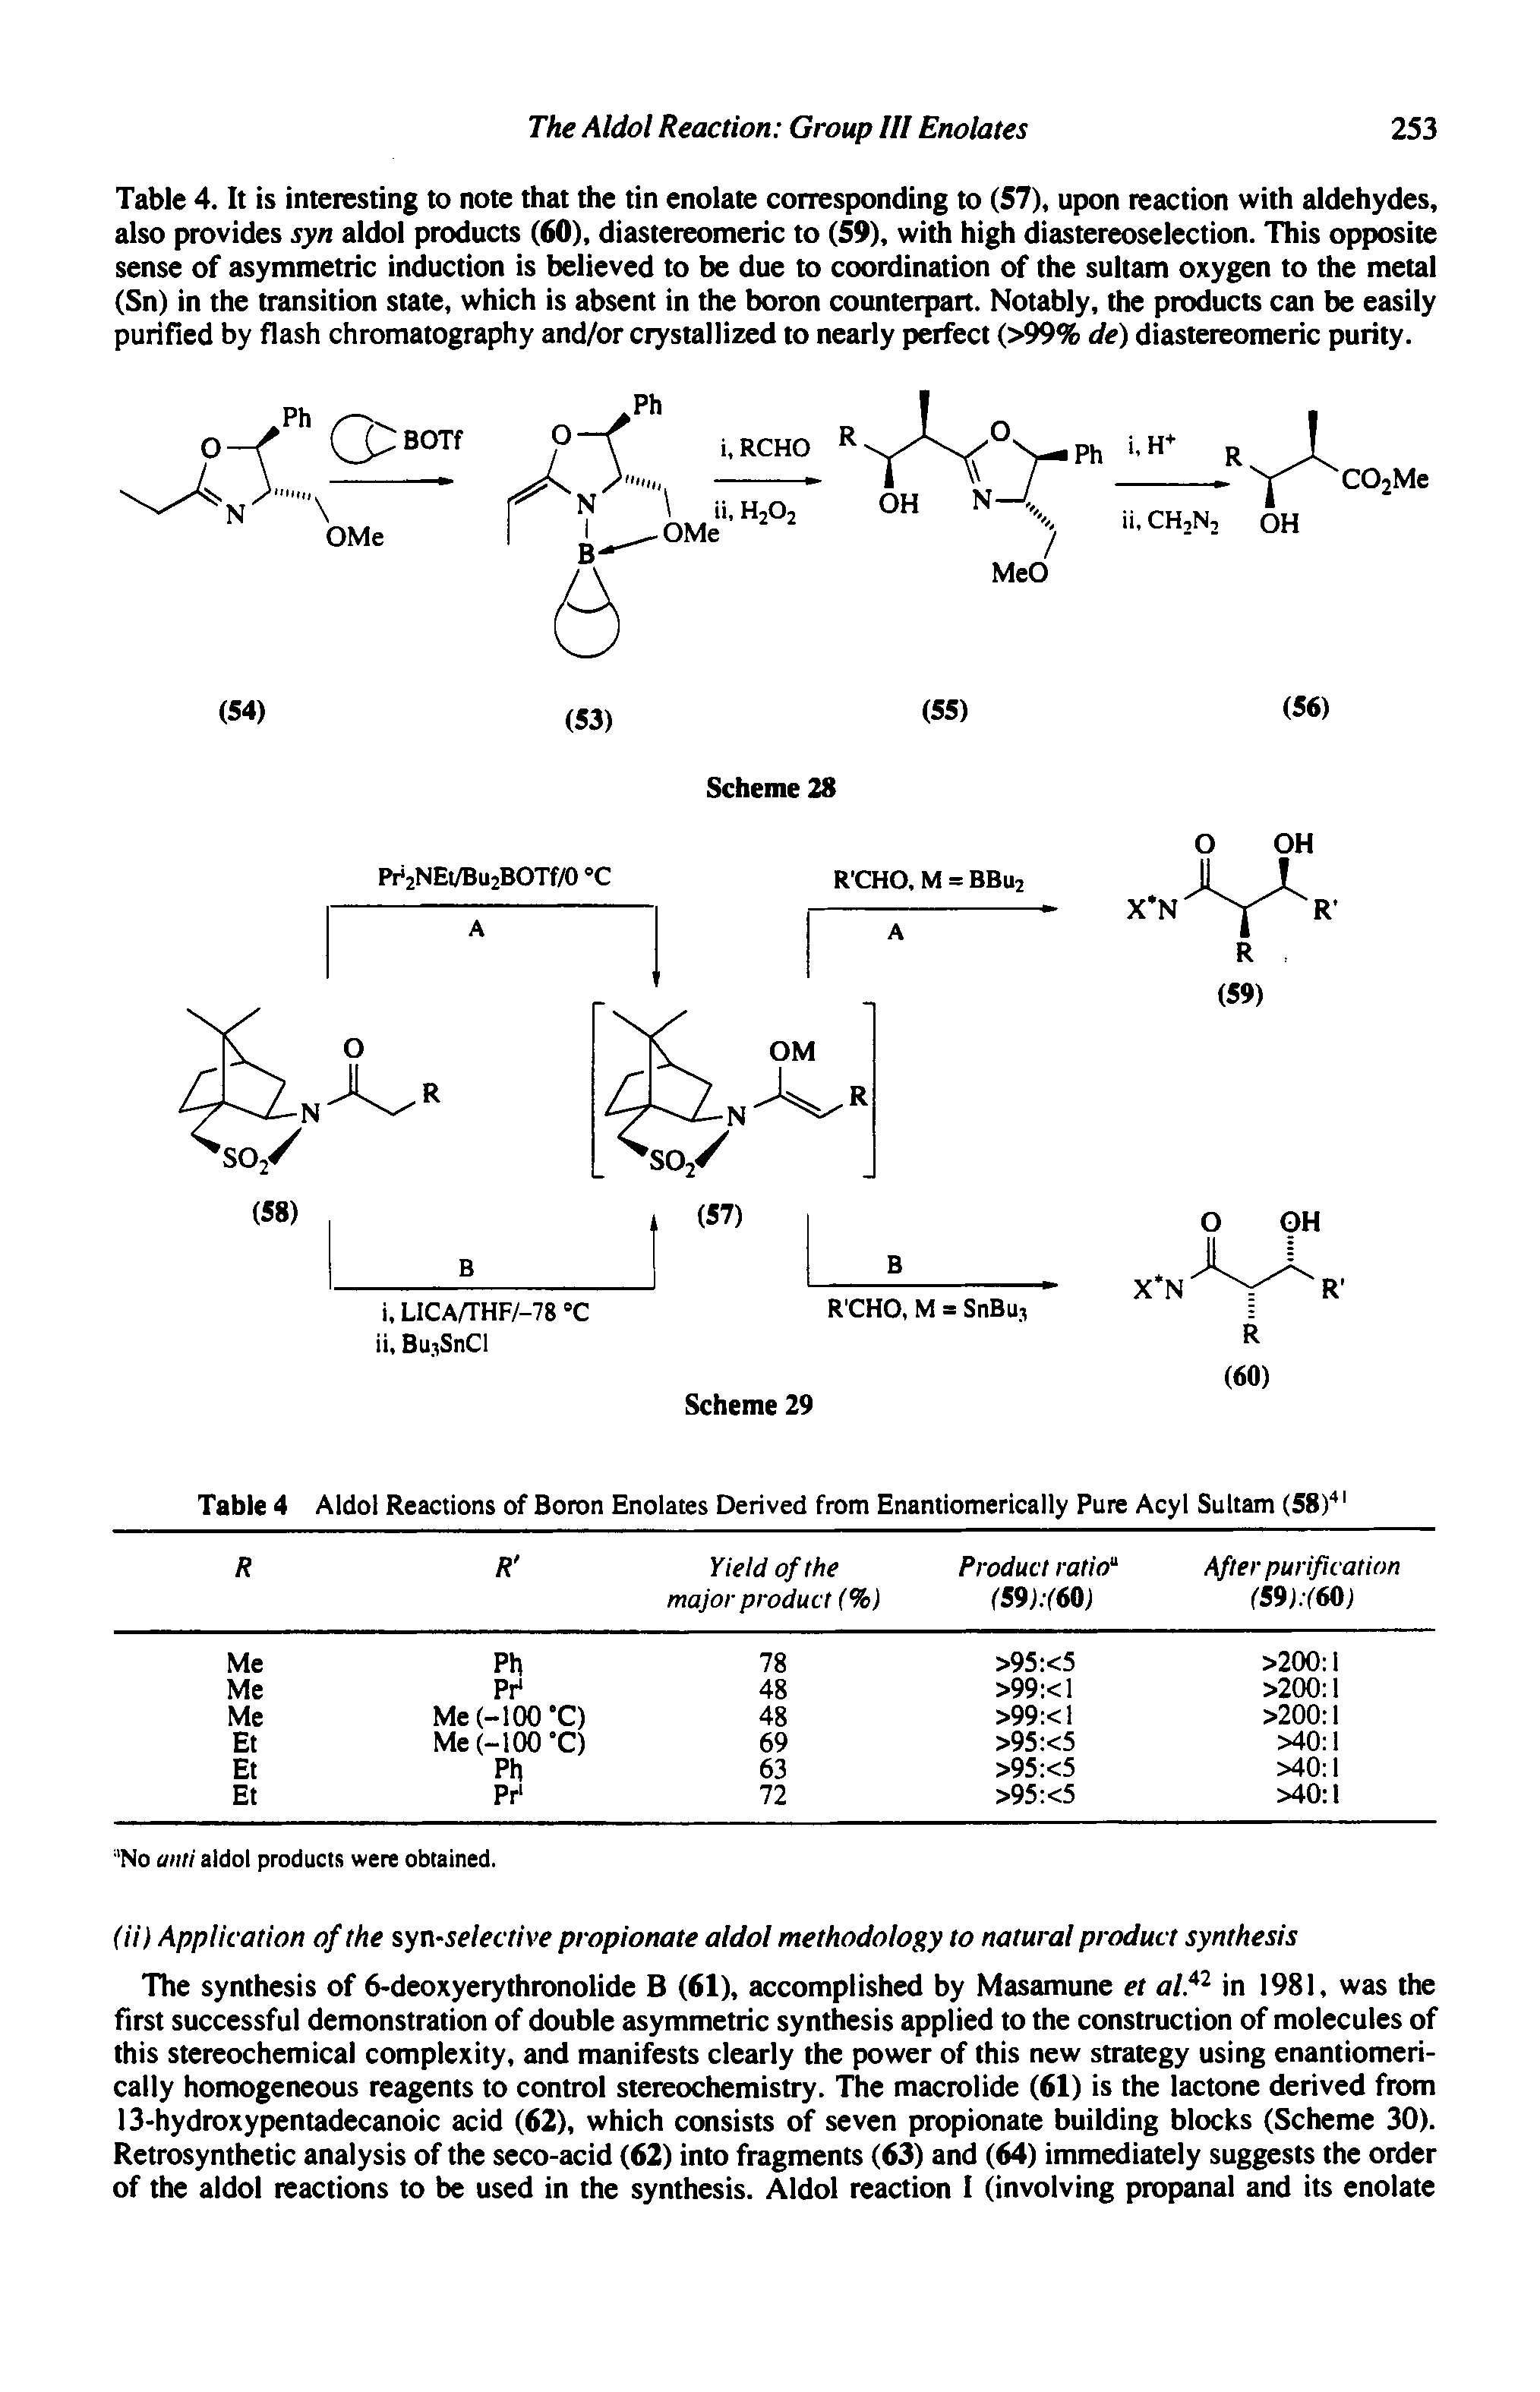 Table 4. It is interesting to note that the tin enolate corresponding to (57), upon reaction with aldehydes, also provides syn aldol products (60), diastereomeric to (59), with high diastereoselection. This opposite sense of asymmetric induction is believed to be due to coordination of the sultam oxygen to the metal (Sn) in the transition state, which is absent in the boron counterpart. Notably, the products can be easily purified by flash chromatography and/or crystallized to nearly perfect (>99% de) diastereomeric purity.